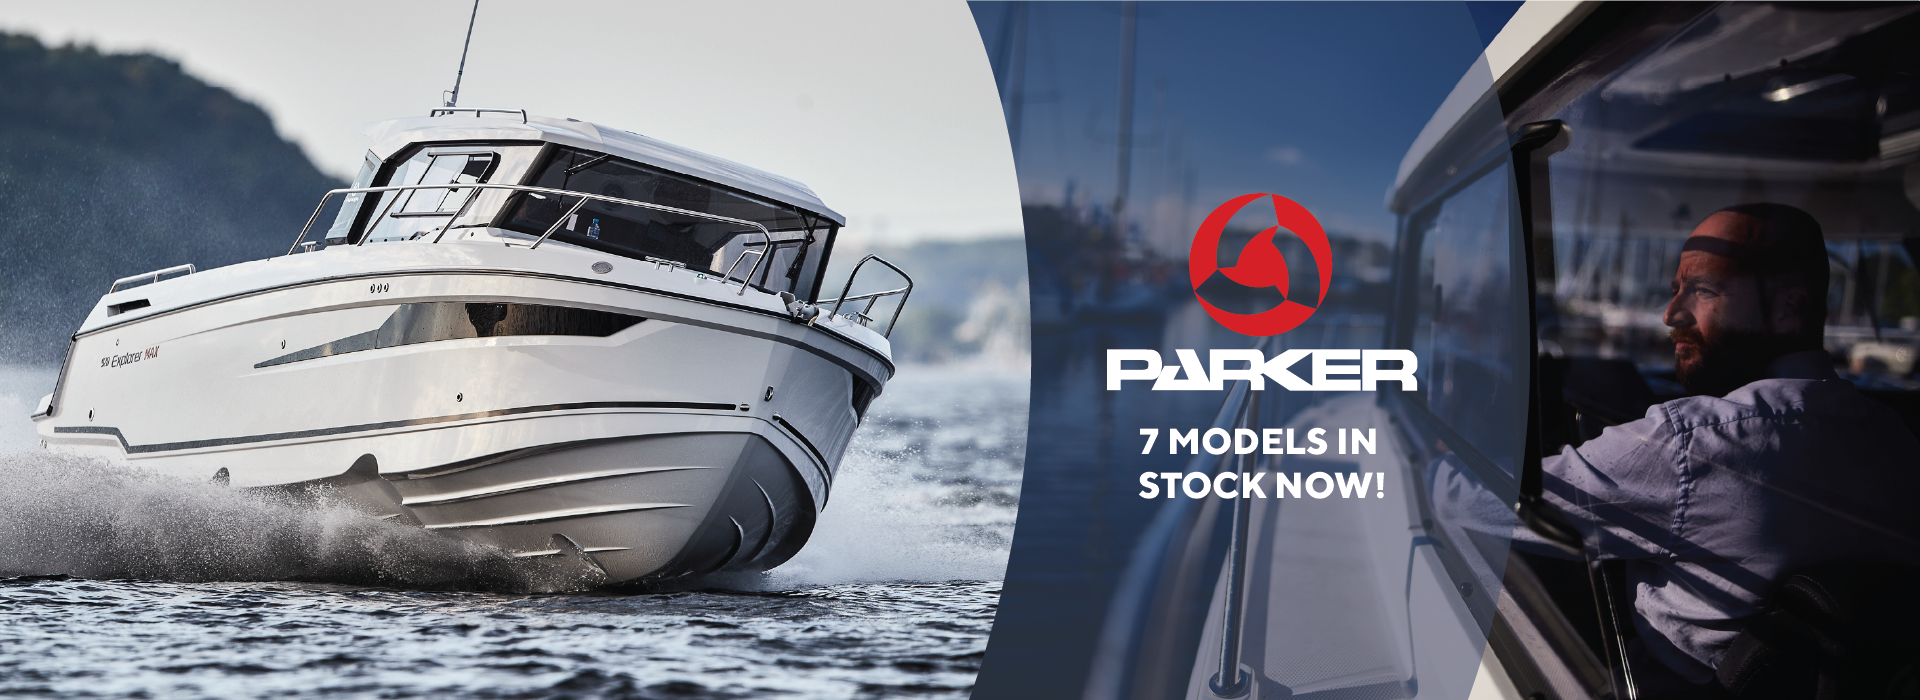 Parker Boats For Sale Ontario